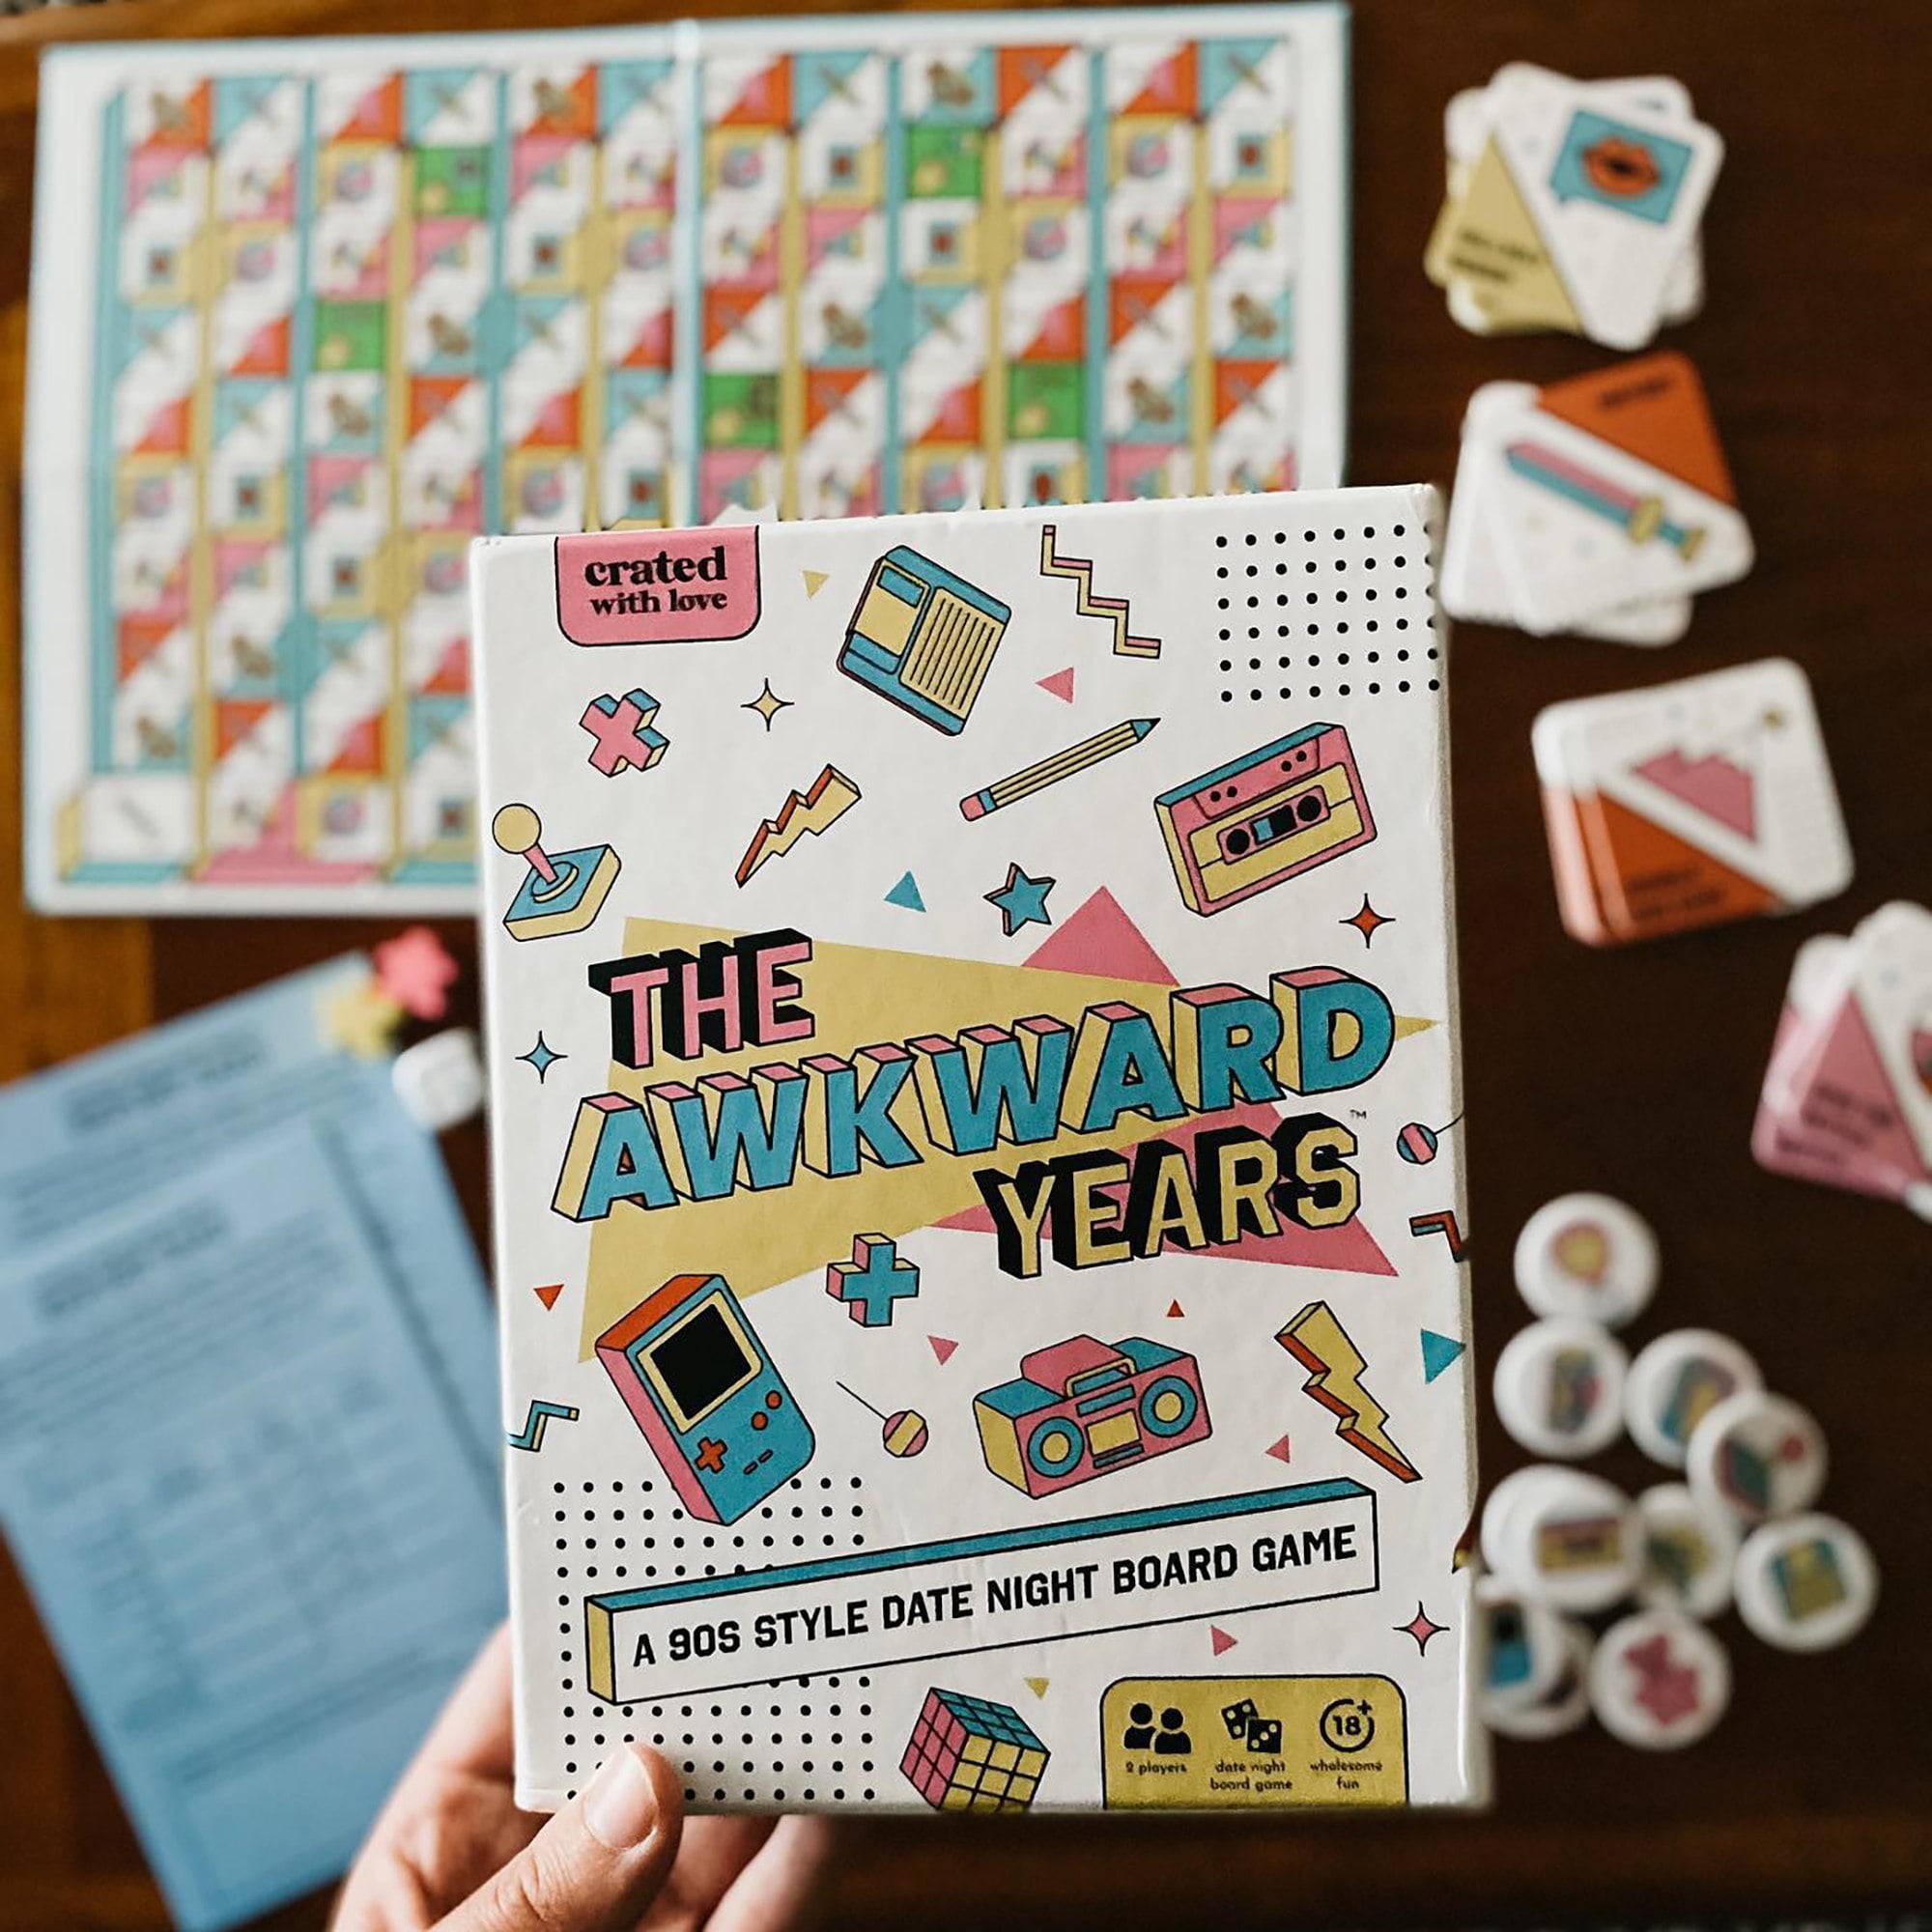 The Awkward Years - A Date Night That's All That and a Bag of